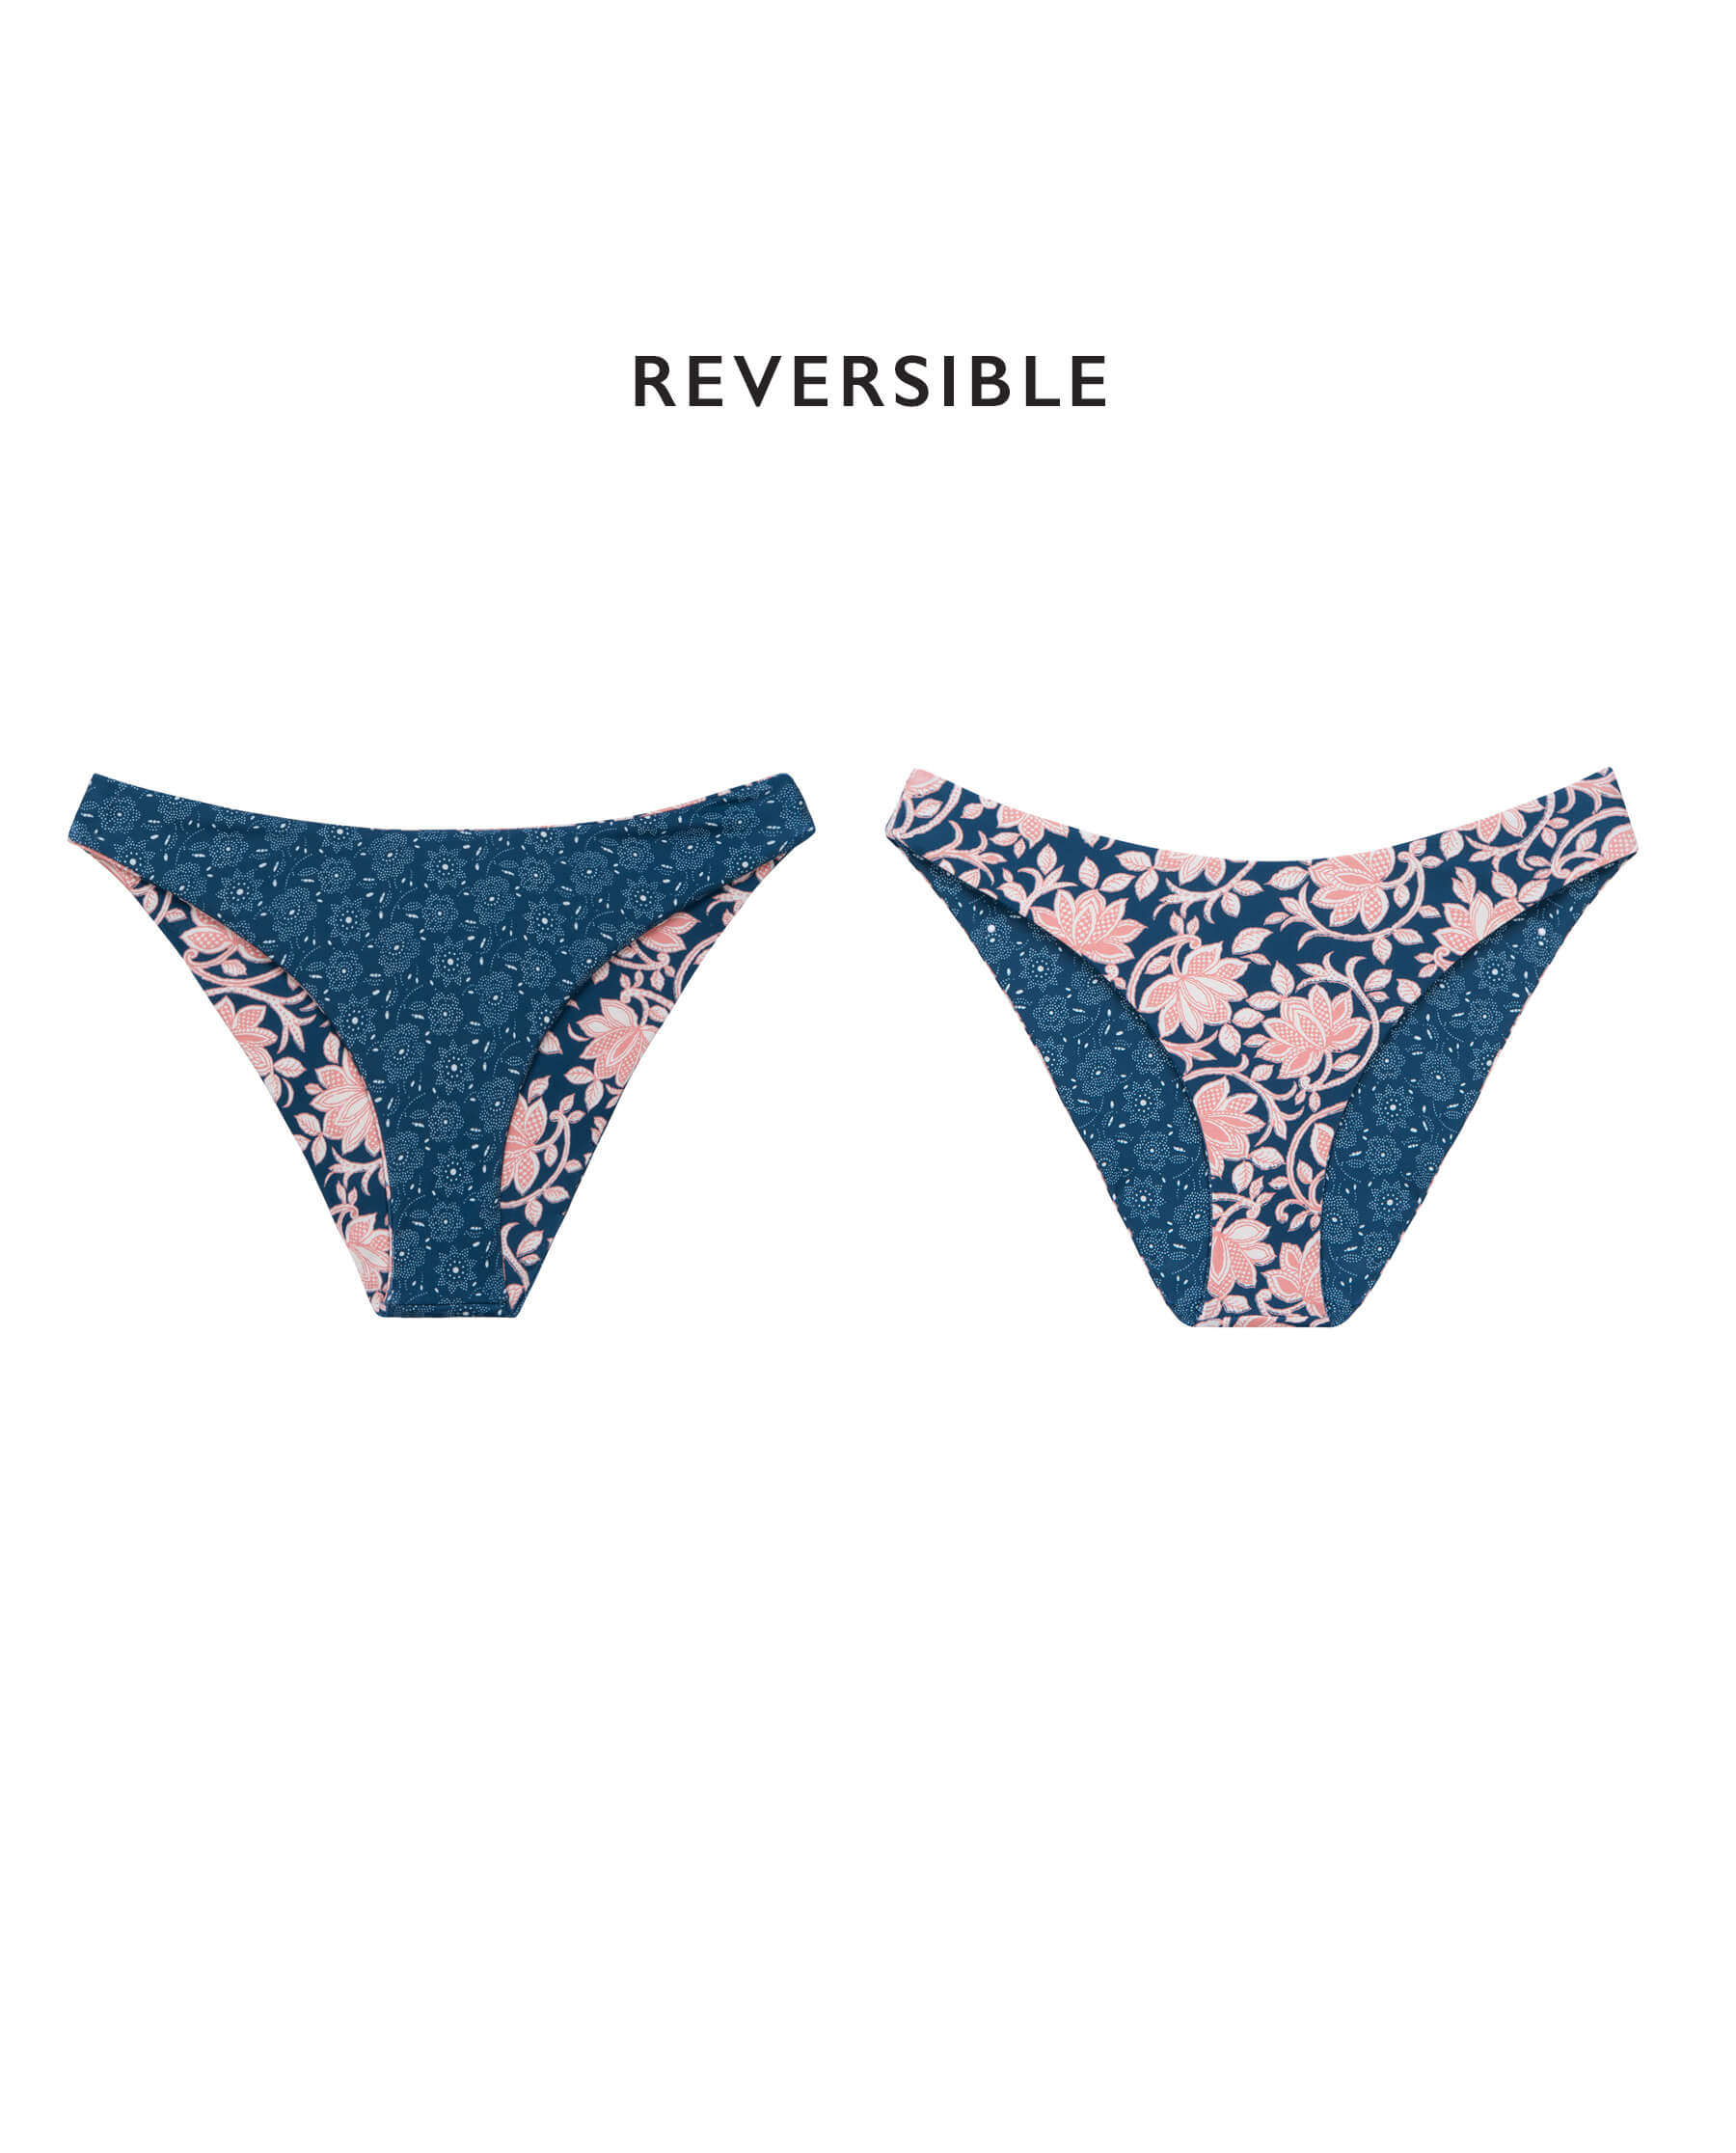 The Reversible Cheeky Brief. -- Bay Oasis Floral and Bay Bandana Daisy SWIM BOTTOMS THE GREAT. SP24 SWIM